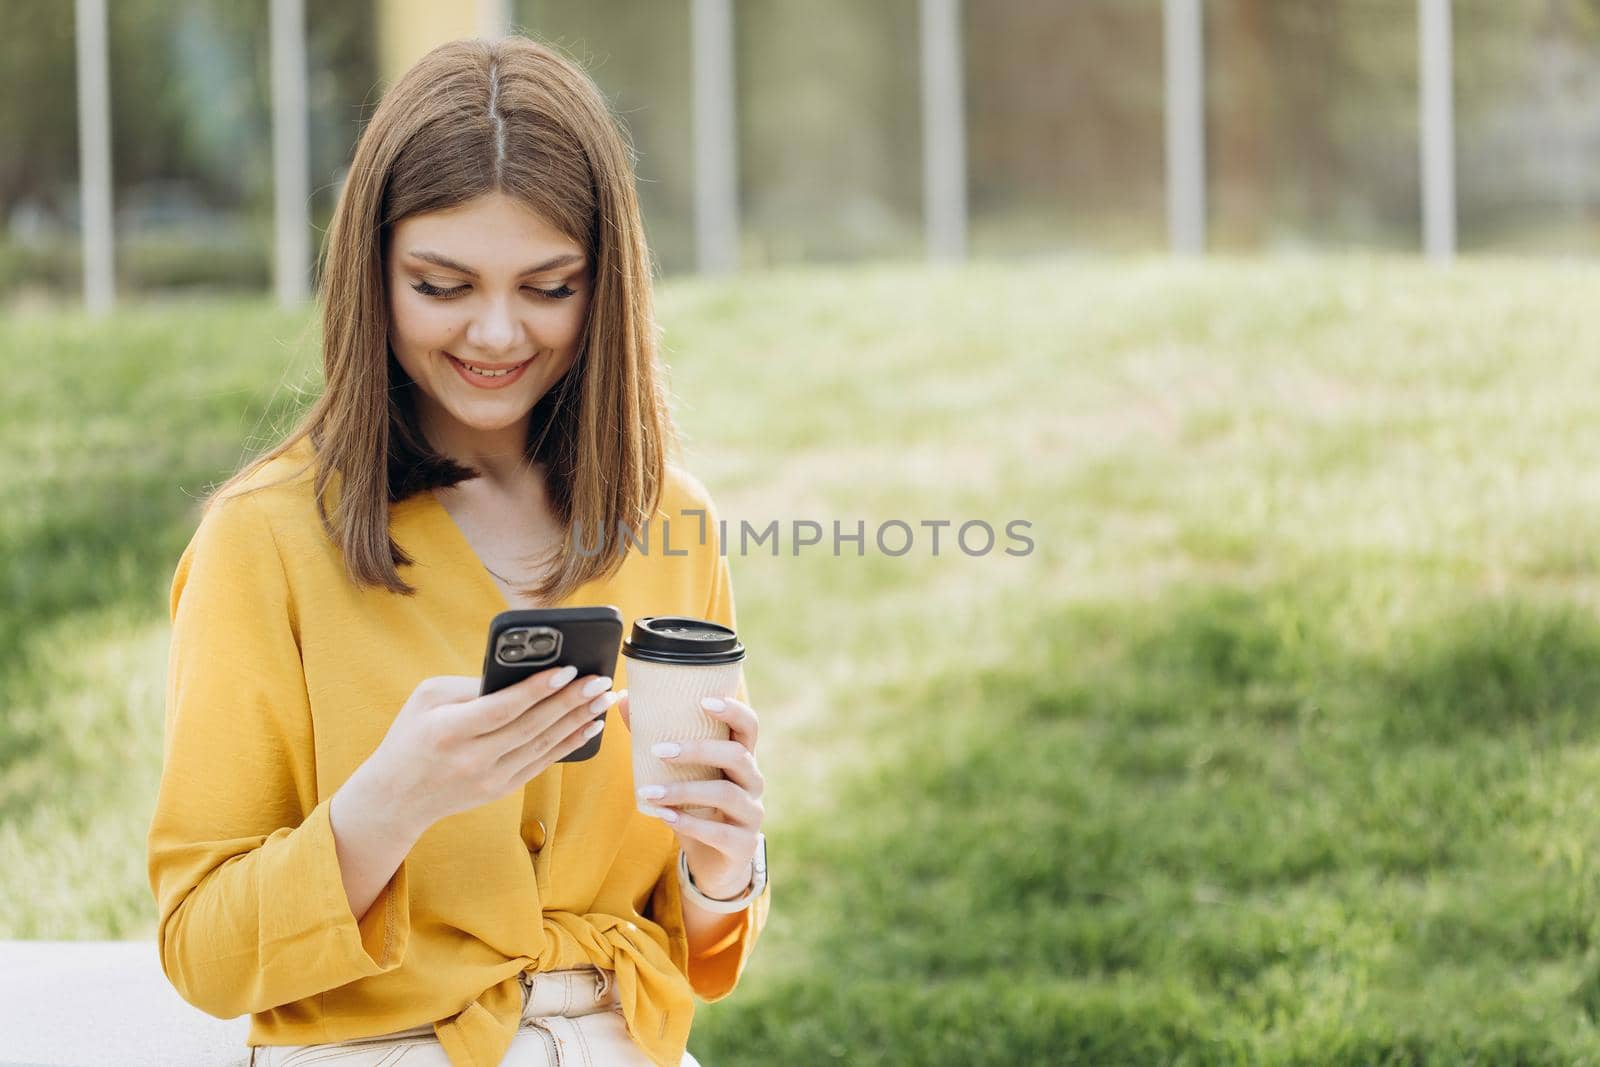 Happy businesswoman using mobile phone at remote workplace. Smiling woman browsing internet on smartphone near office. Portrait of business woman reading messages on cellphone.